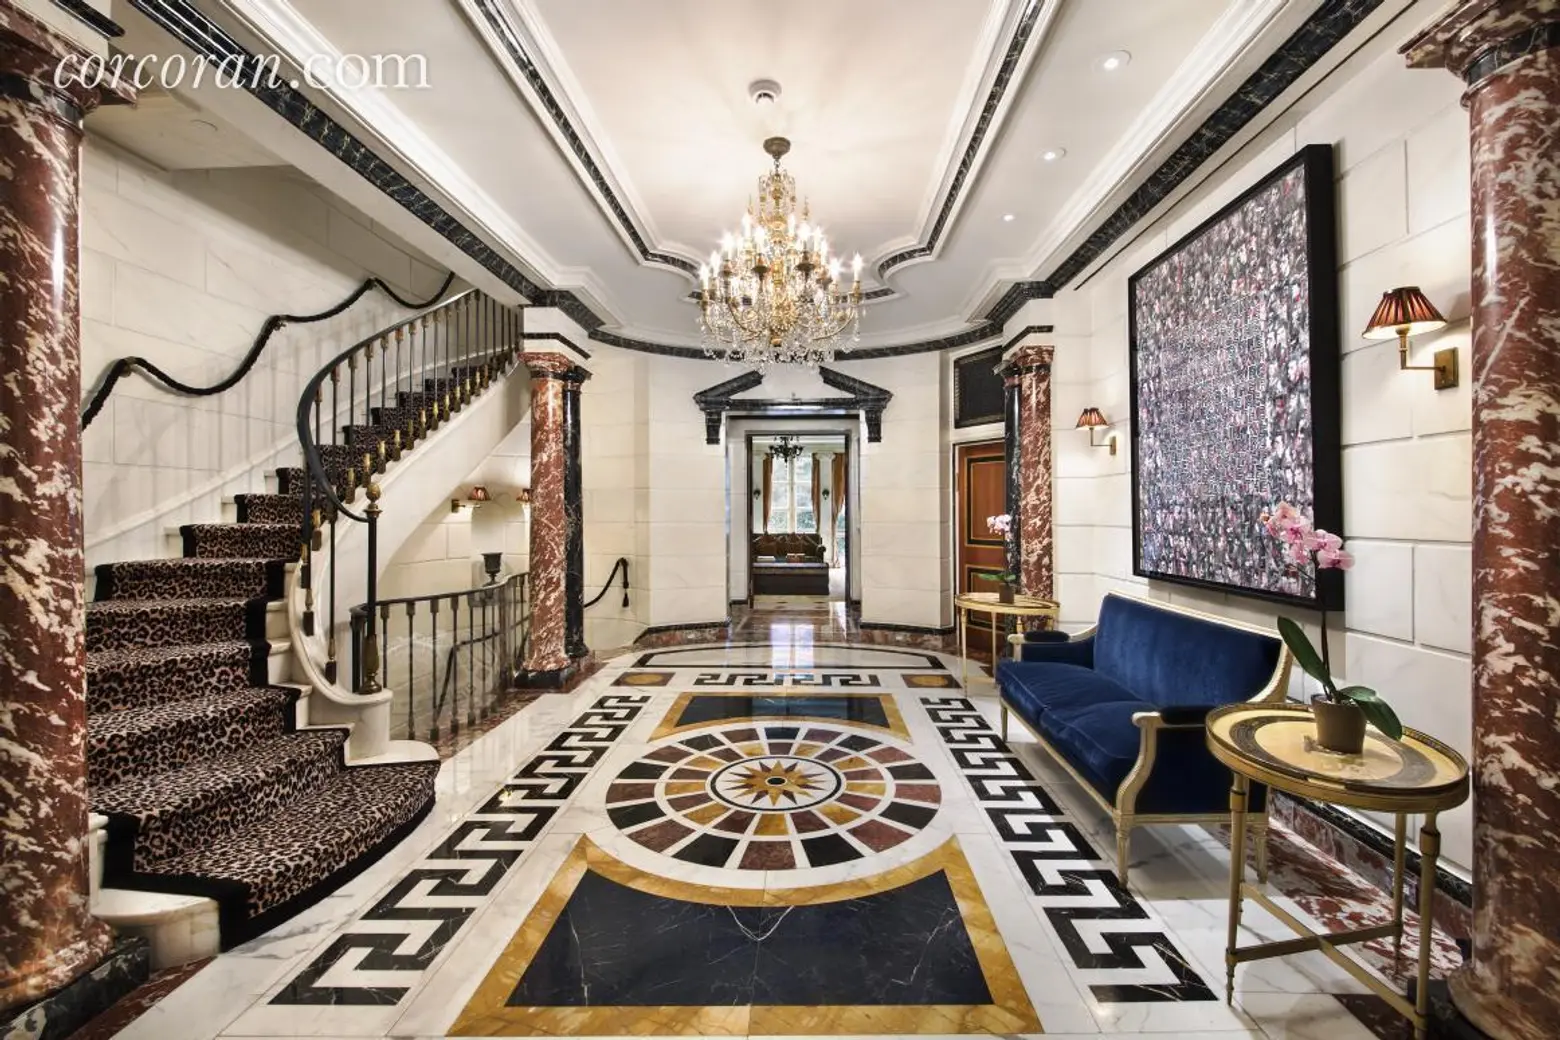 Versace’s Former Mansion Gets $55K/Month Price Cut; The Seafood Restaurants of City Island